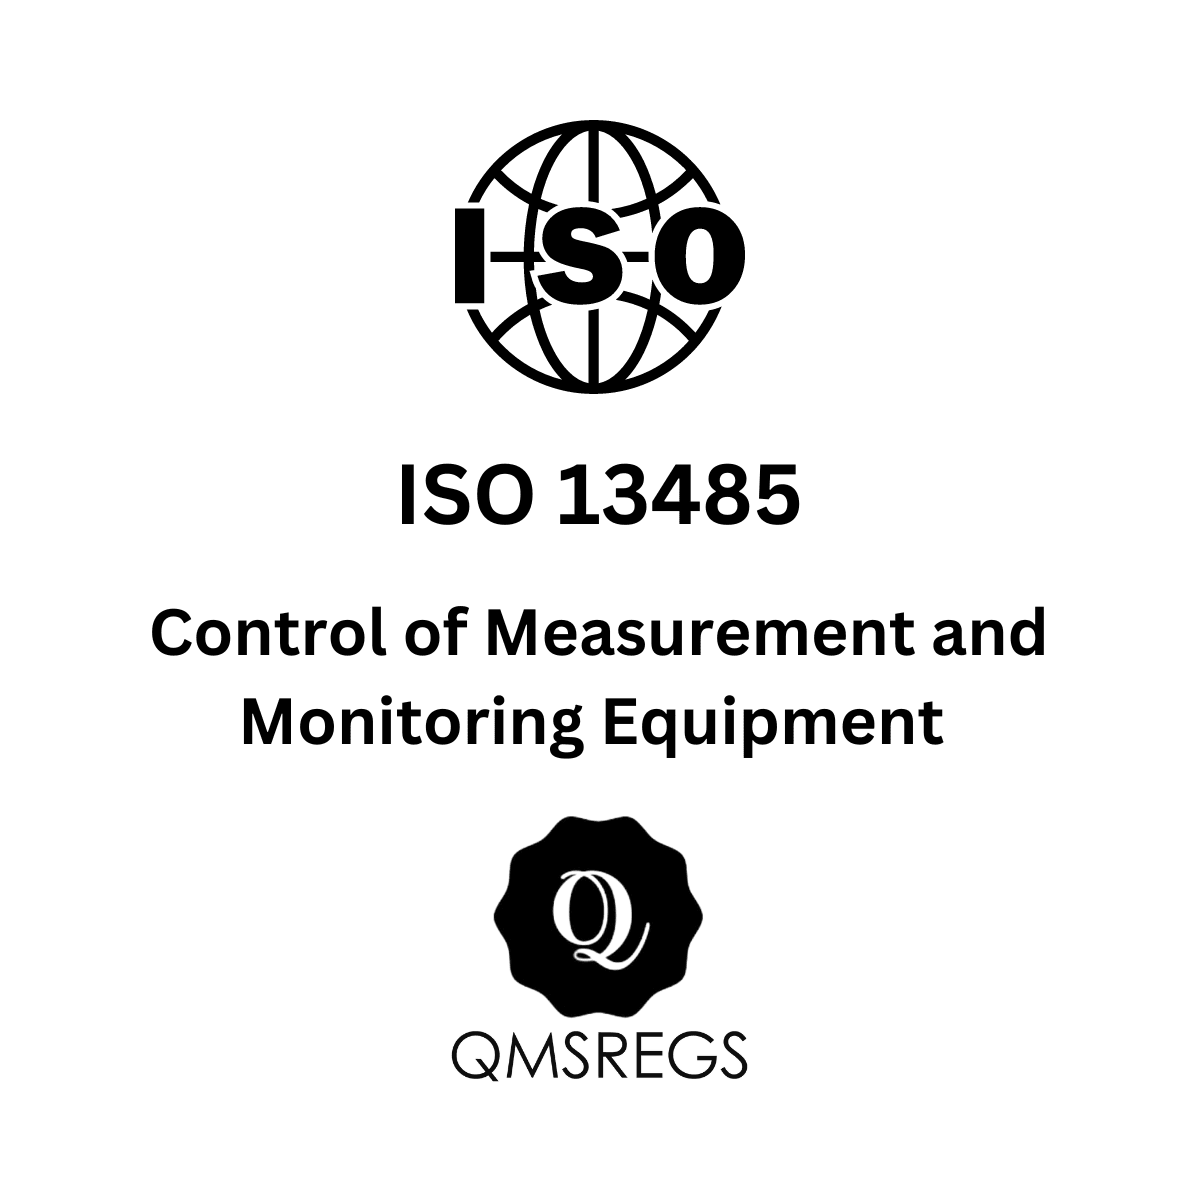 ISO 13485 Control of Measurement and Monitoring Equipment Procedure template